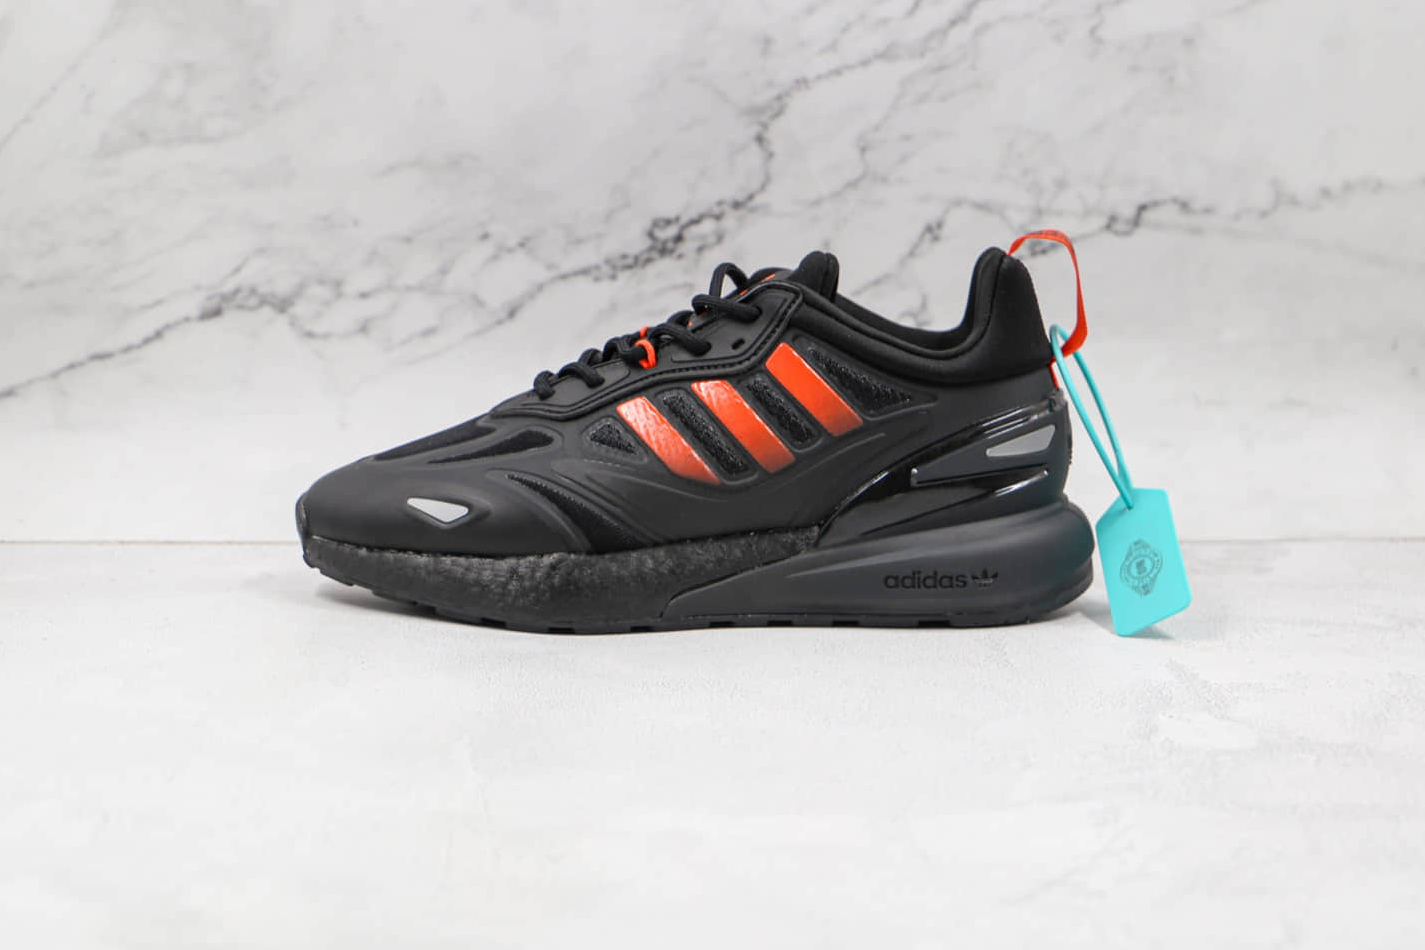 Adidas ZX 2K Boost 2.0 'Black Solar Red' GZ9087 - Stylish and Sporty Footwear for Active Individuals